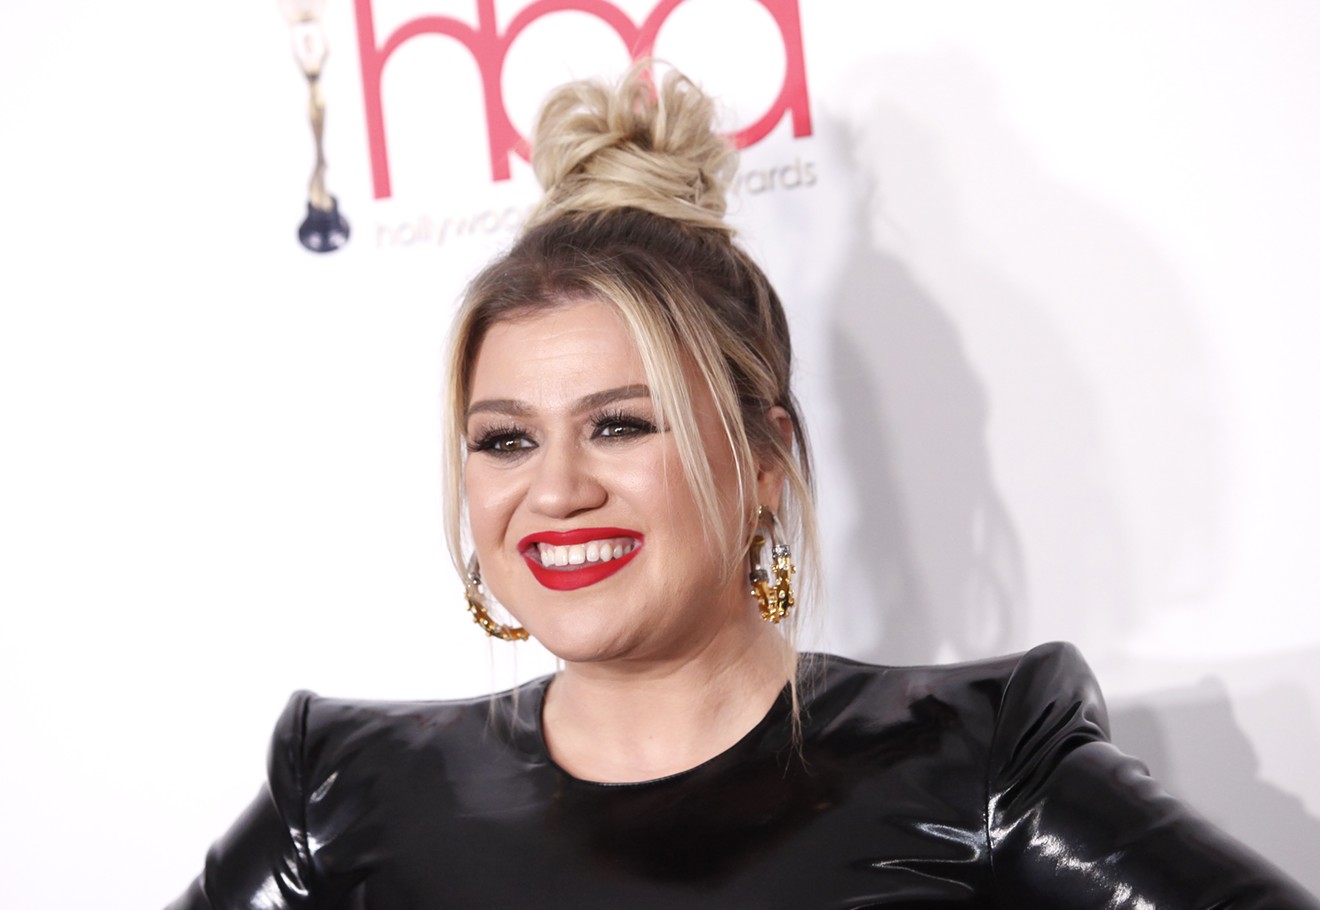 Do we need another Christmas song? If it's by Kelly Clarkson, sure.